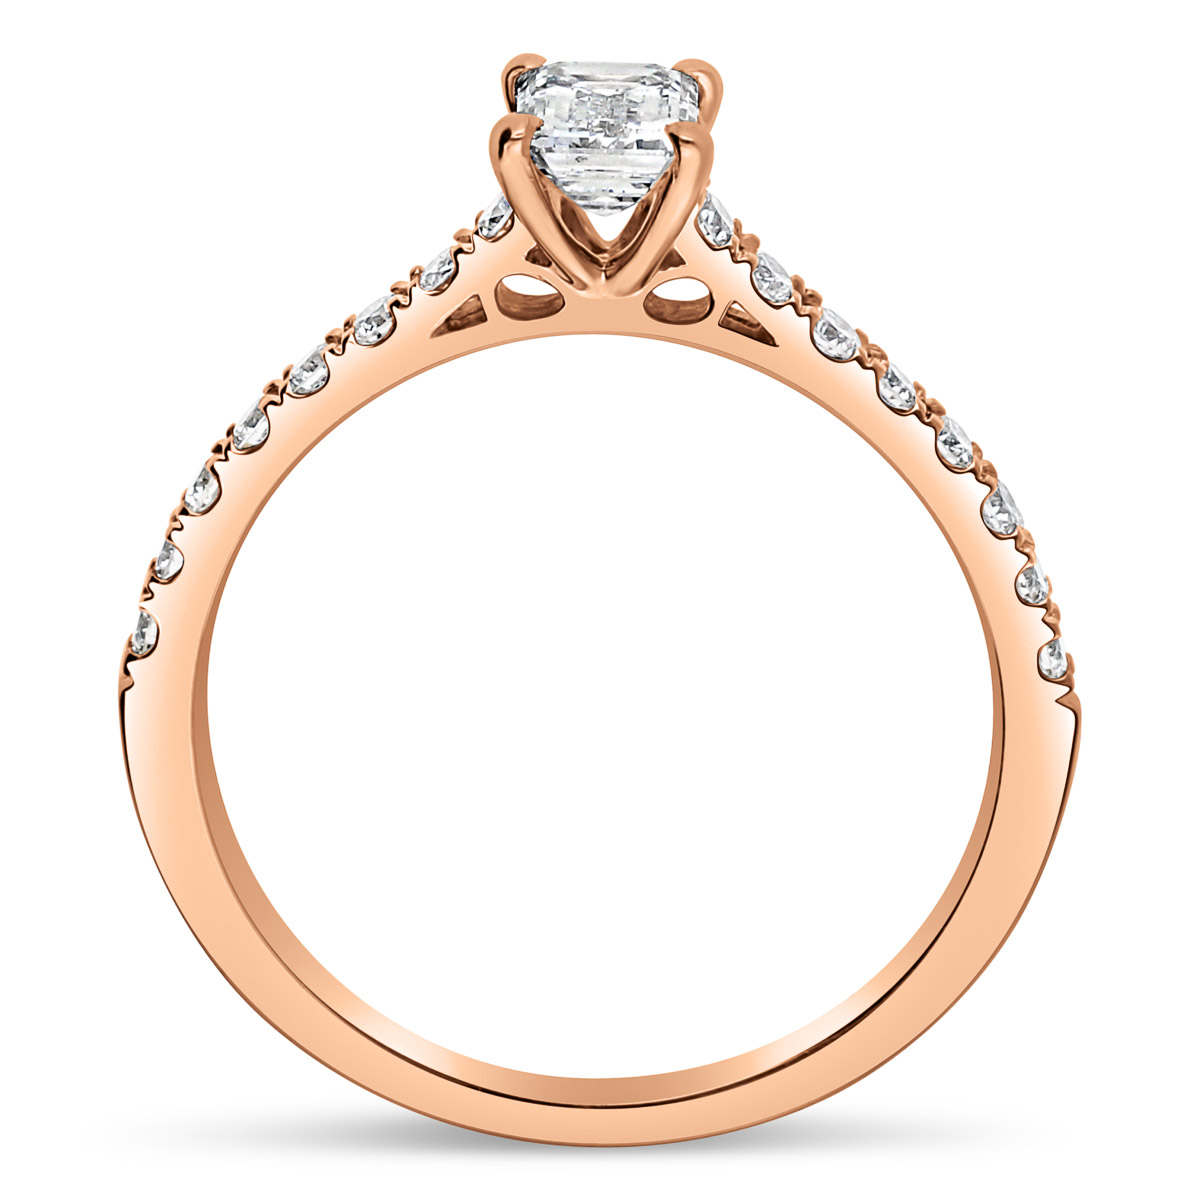 manihi-or-solitaires-diamants-certifies-style-classique-or-rose-750-